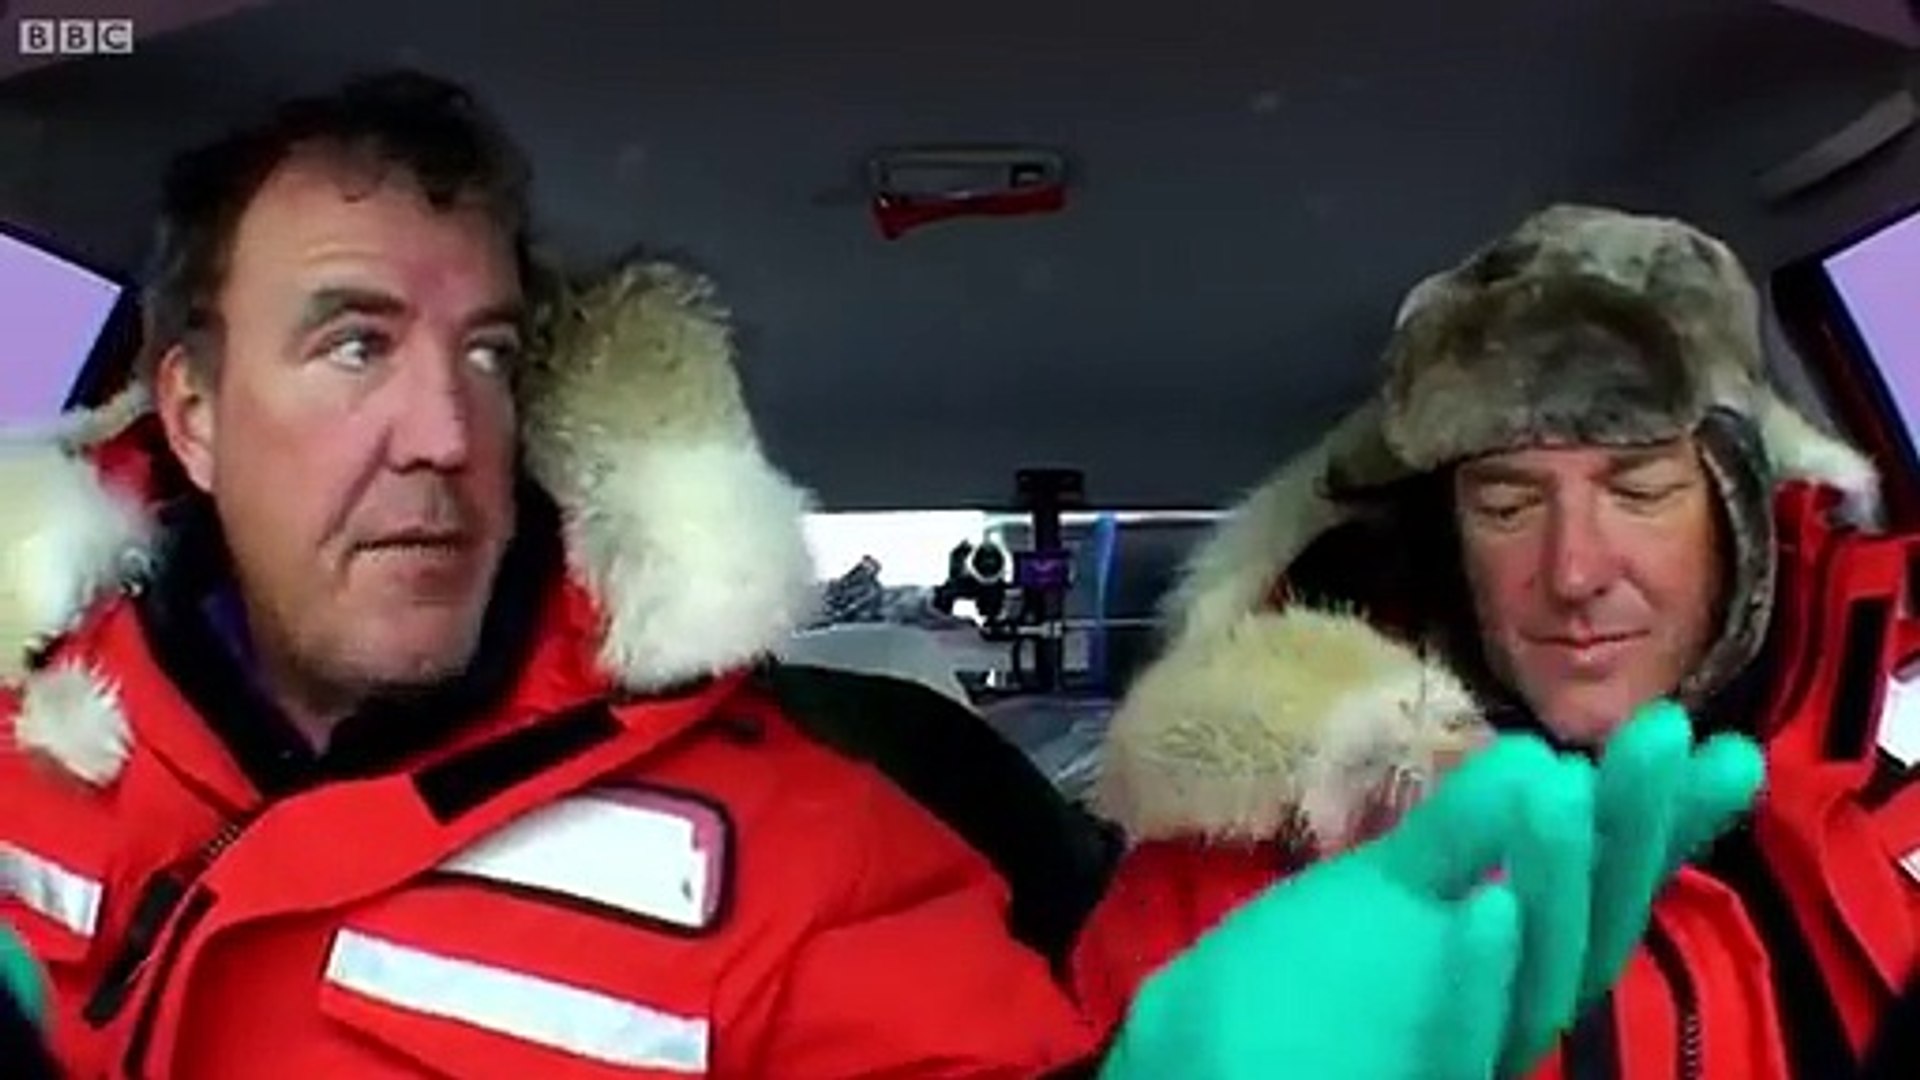 On Thin Ice - Clarkson & May DANGER - Top Gear Polar Special Pt.3 - in HD - BBC - video